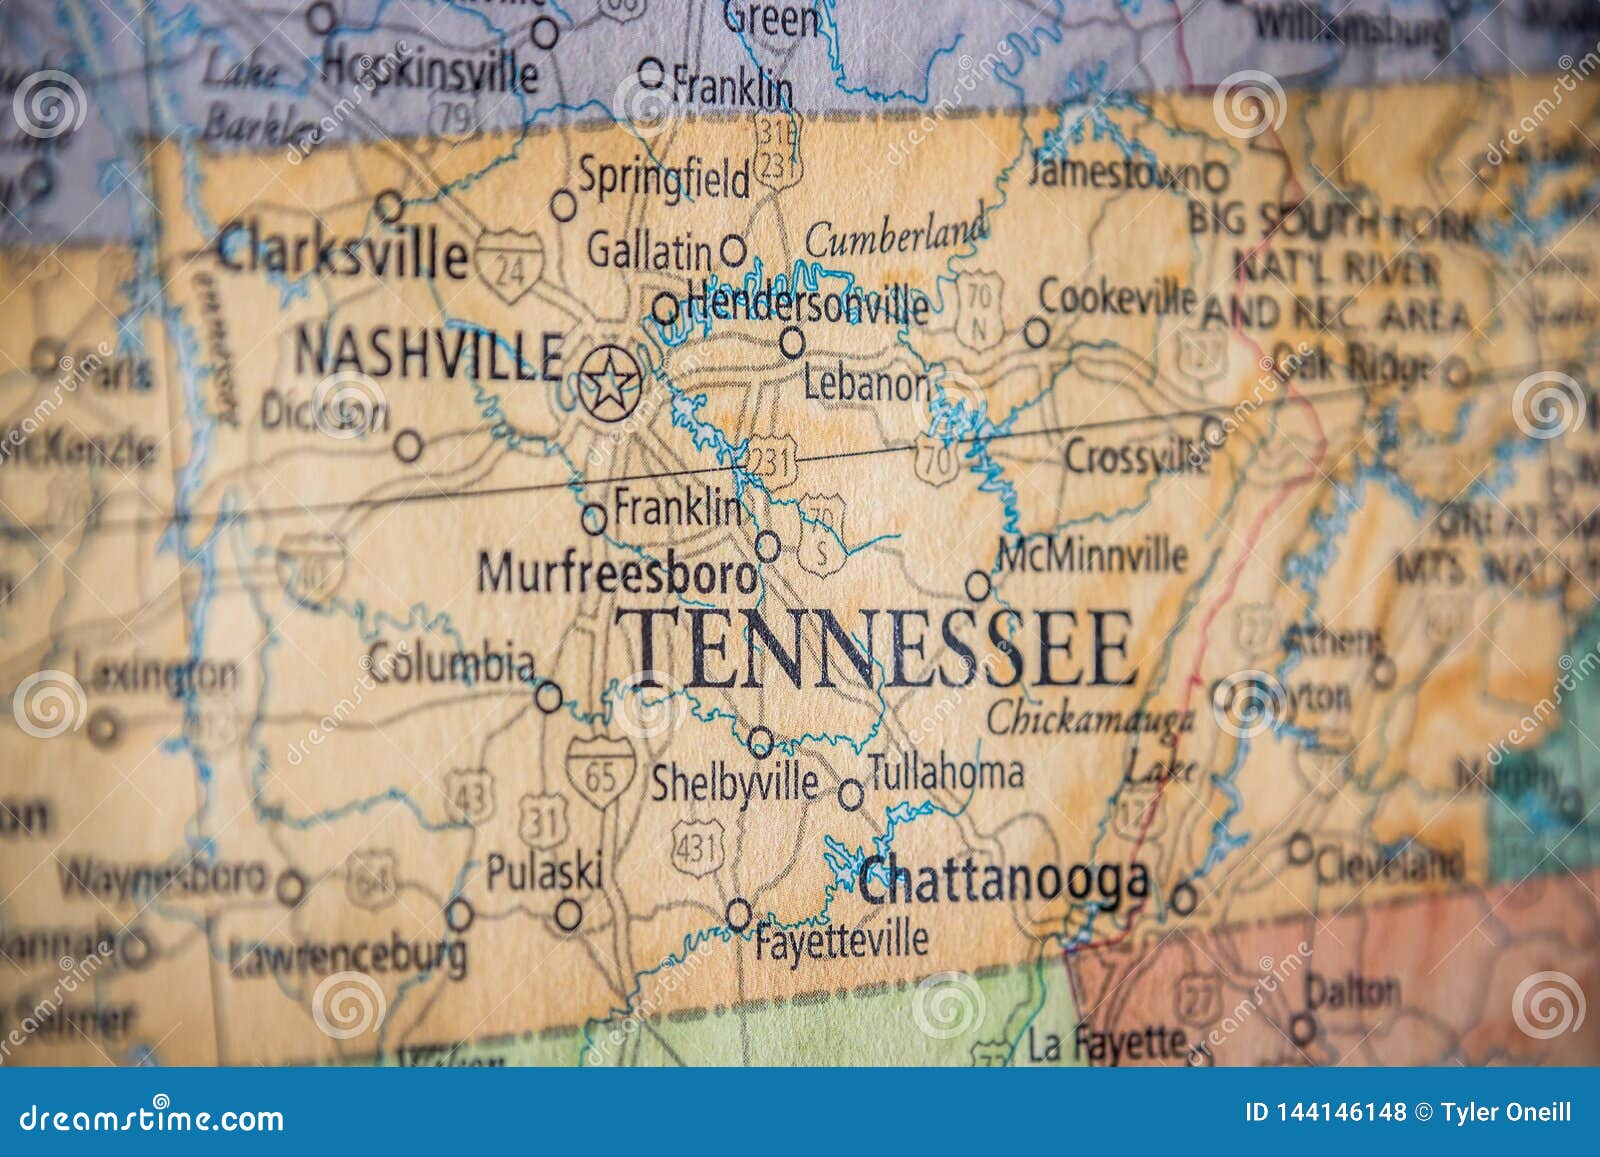 selective focus of tennessee state on a geographical and political state map of the usa